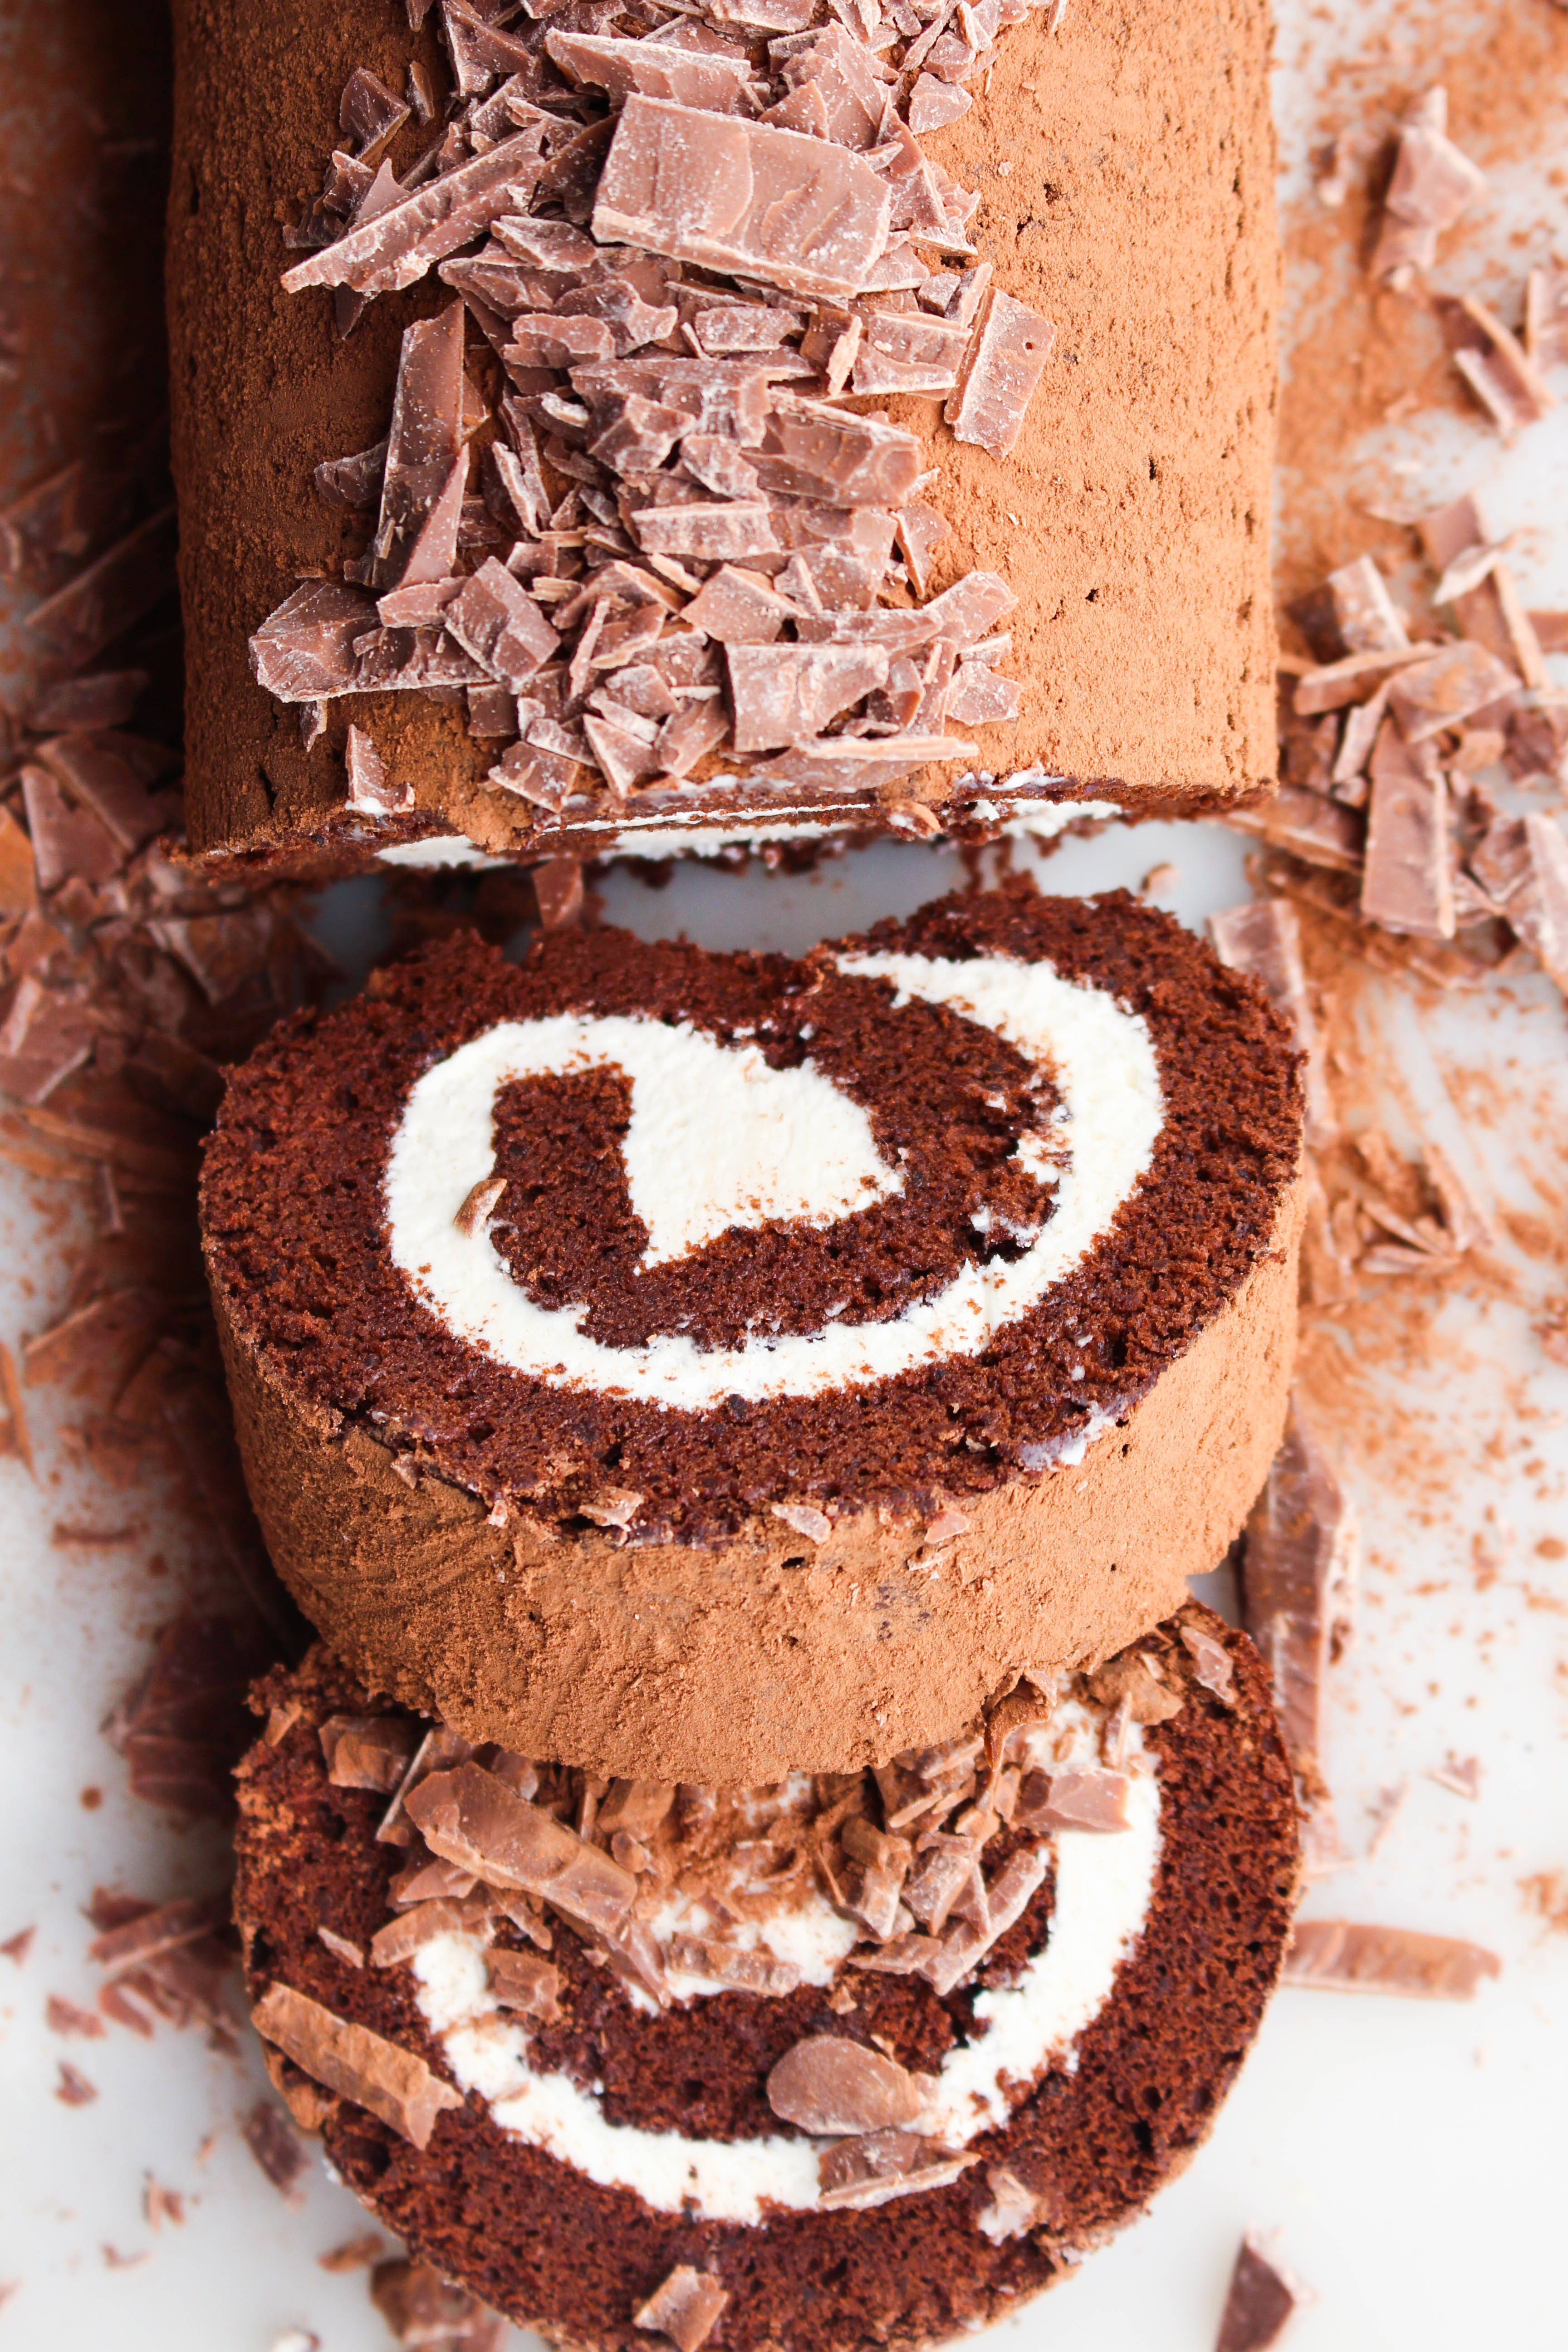 Chocolate Roll Cake with Marshmallow Fluff Filling